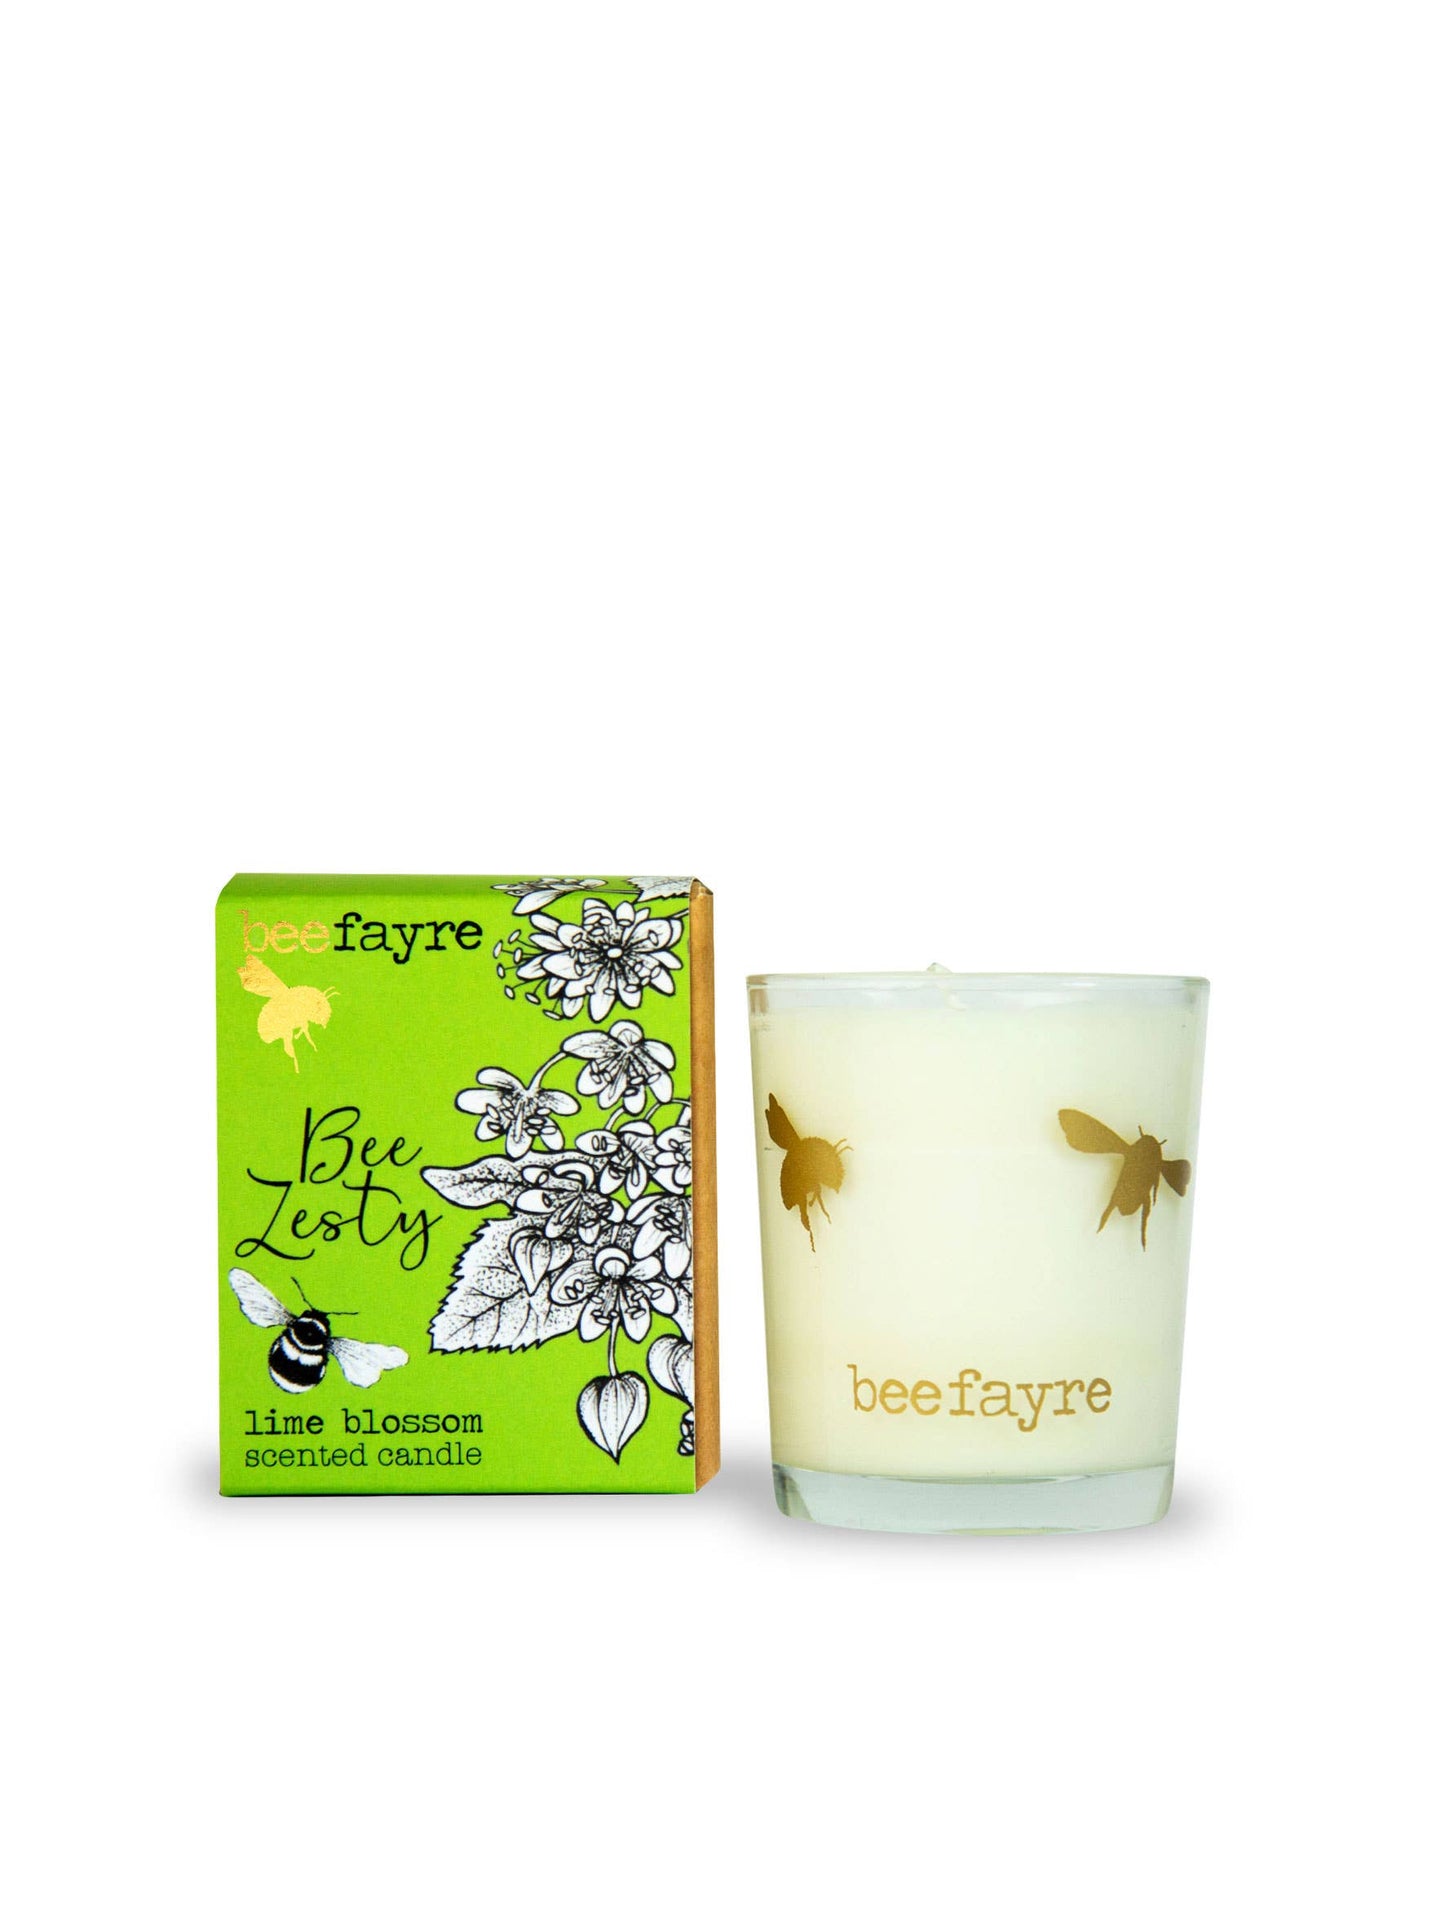 beefayre ltd - Bee Zesty Lime Blossom Small Scented candle